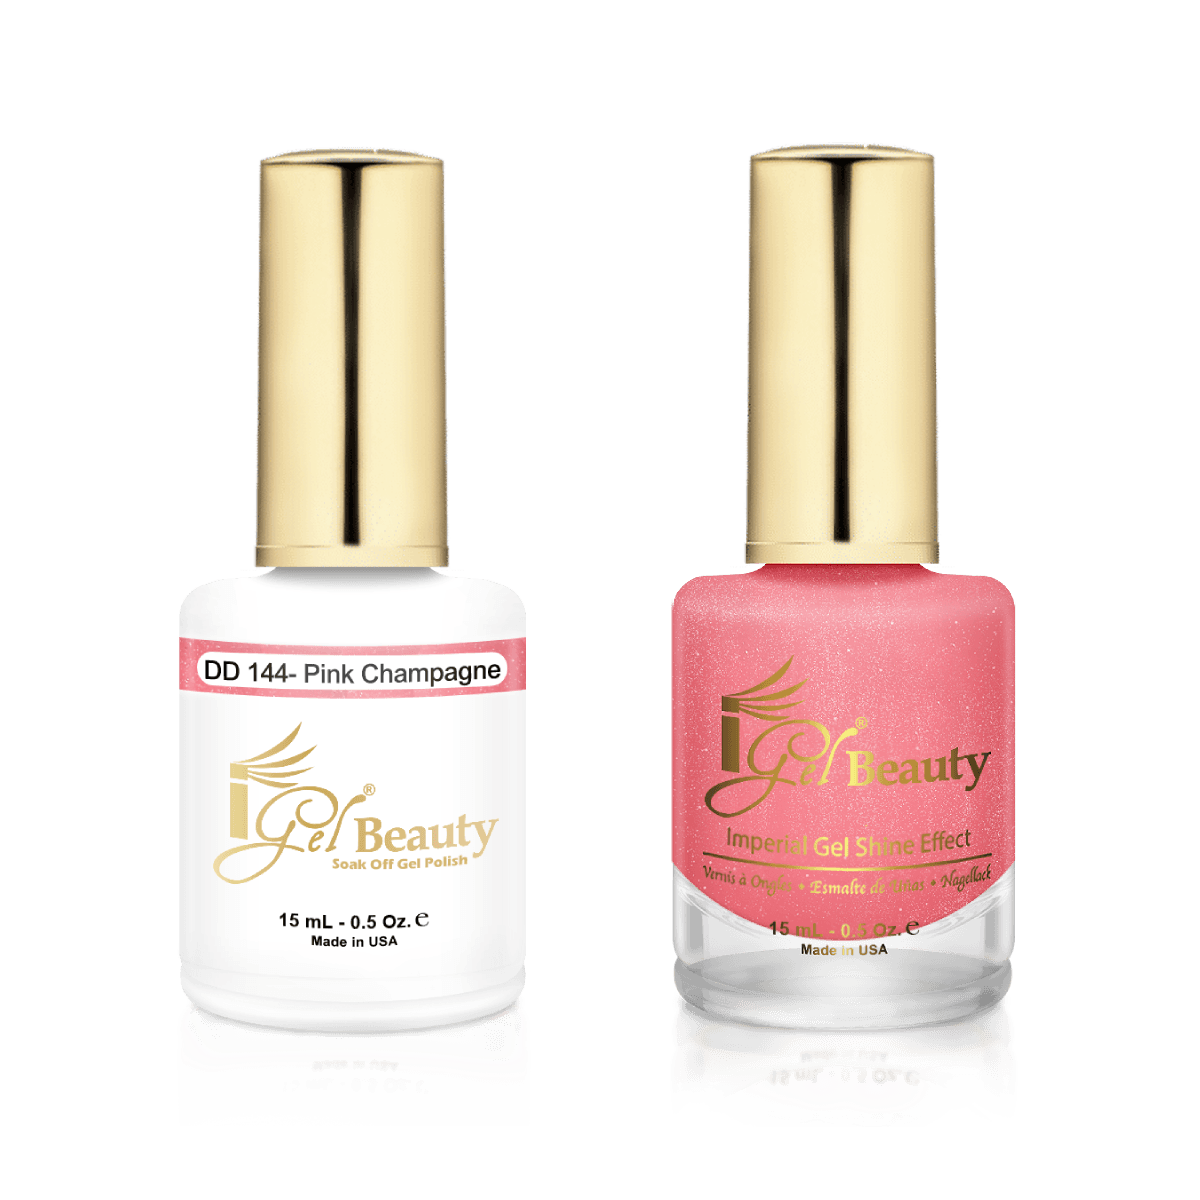 IGel Duo Gel Polish + Matching Nail Lacquer DD 144 PINK CHAMPAGNE